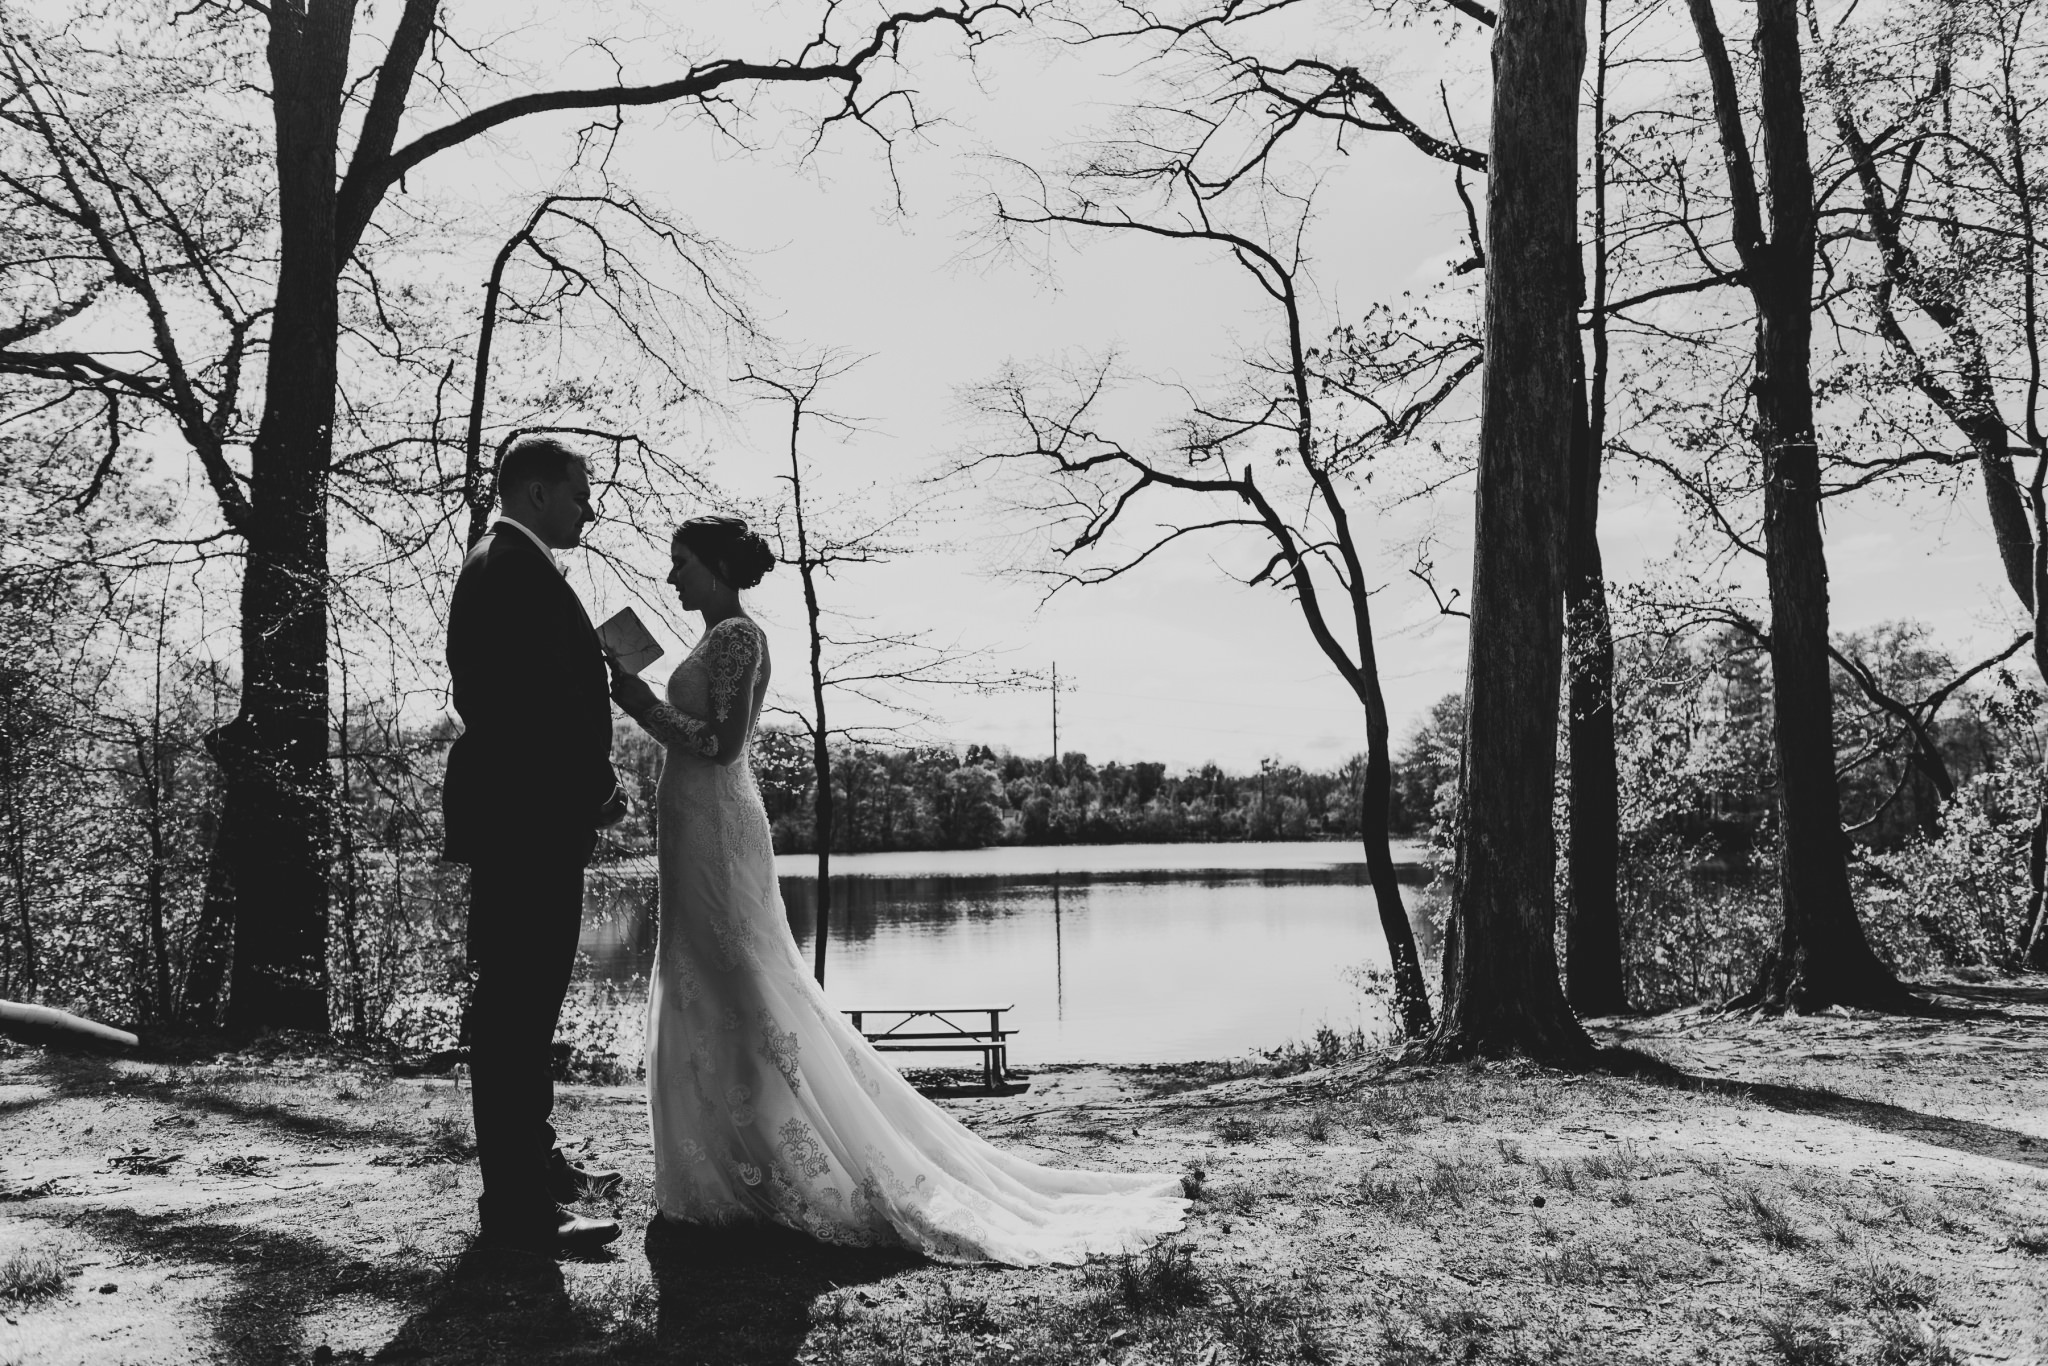  The theme of this wedding was definitely the amazing silhouettes. Here, Luke and Kelly are doing a private reading of their vows, just sharing a moment before their ceremony.

Photos taken during Luke and Kelly's wedding in New Jersey. photographed 